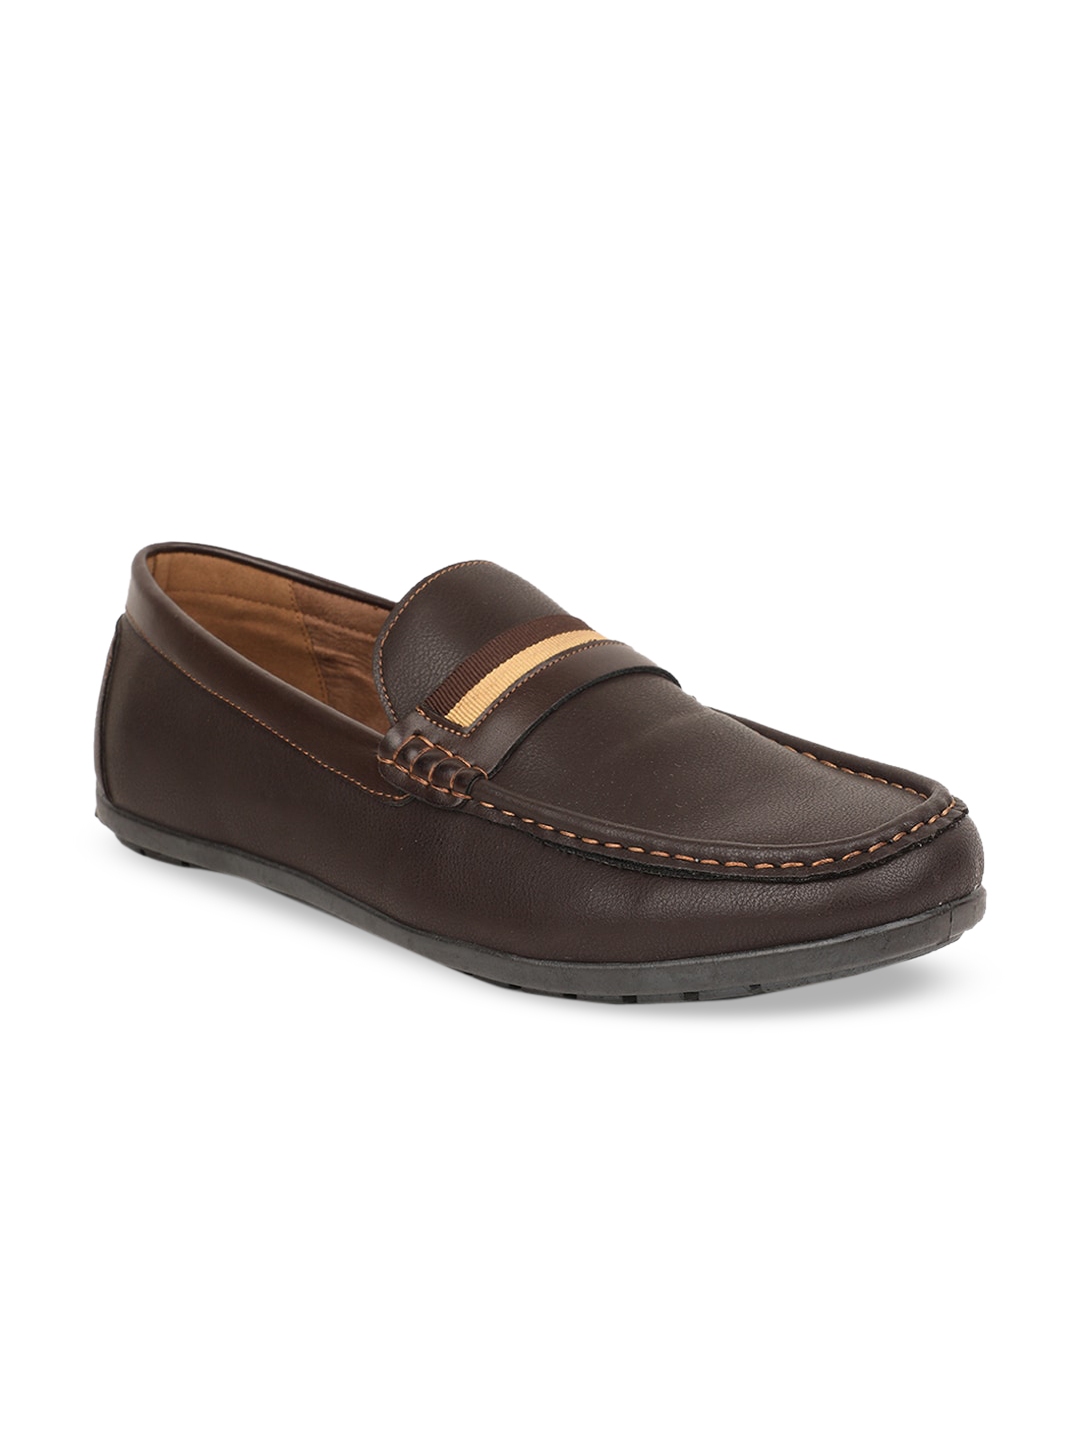 Buy Bata Men Brown Loafers - Casual Shoes for Men 12760832 | Myntra